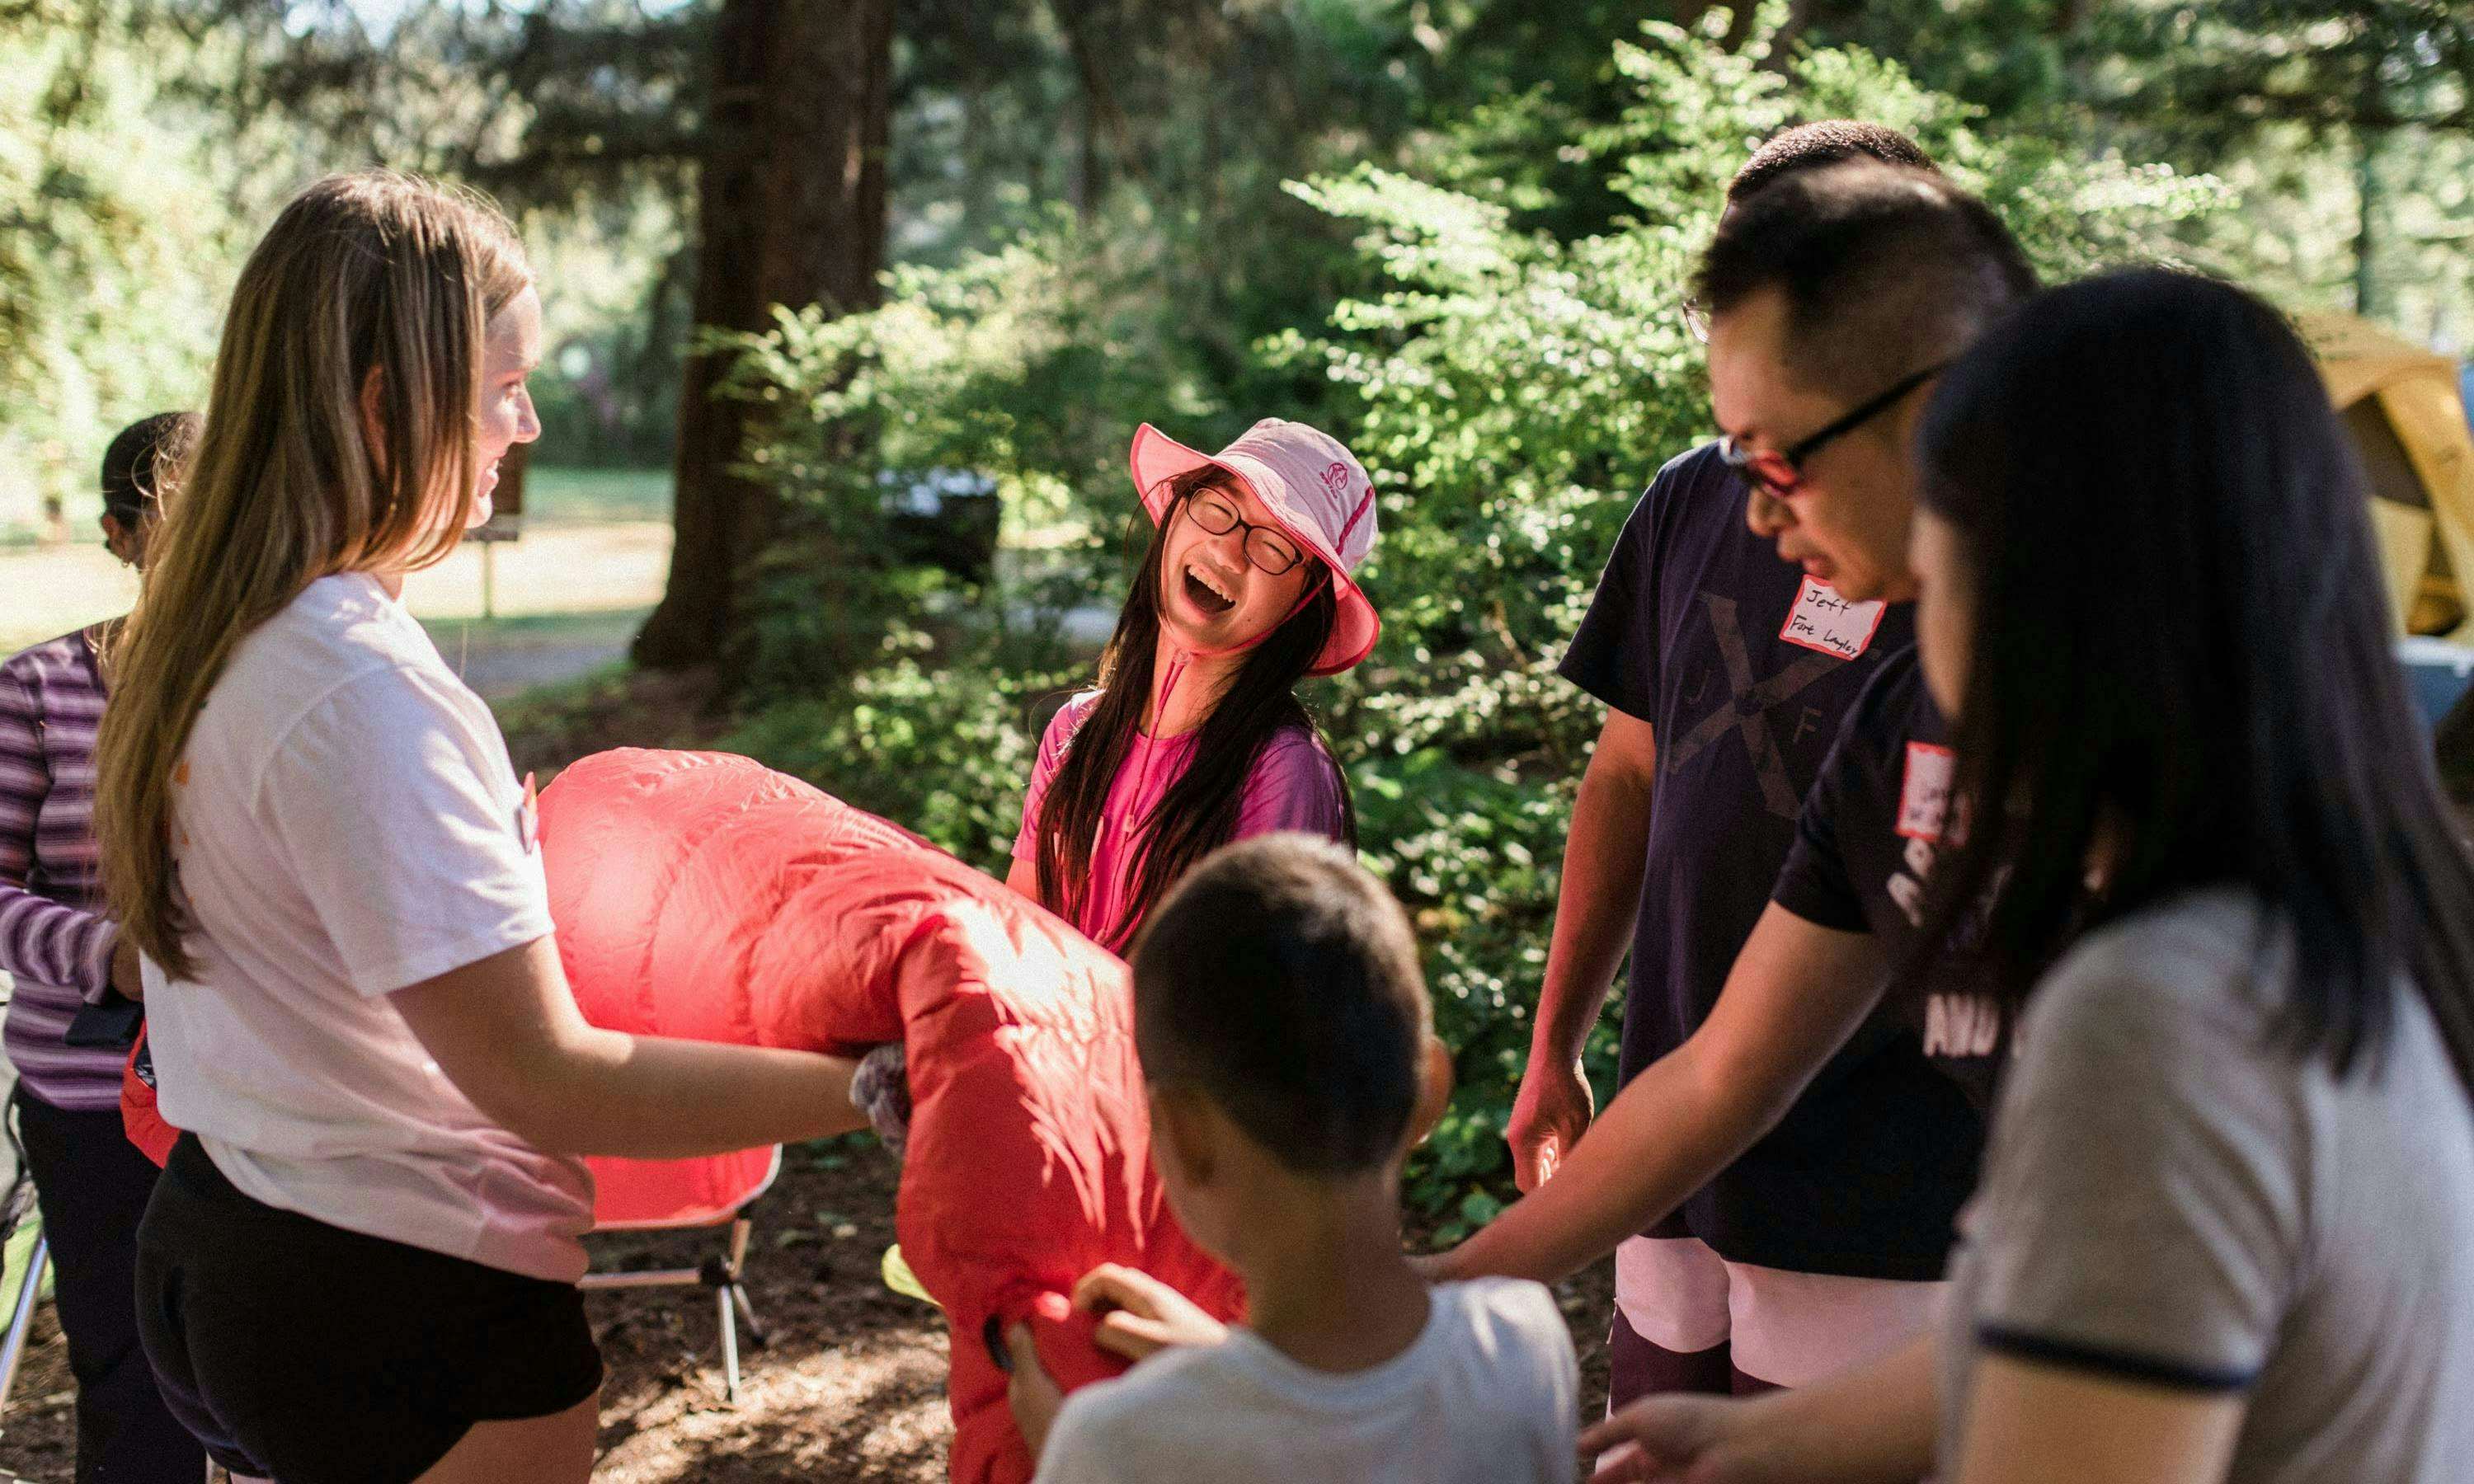 Campers learning about a red sleeping bag at a learn-to-camp event